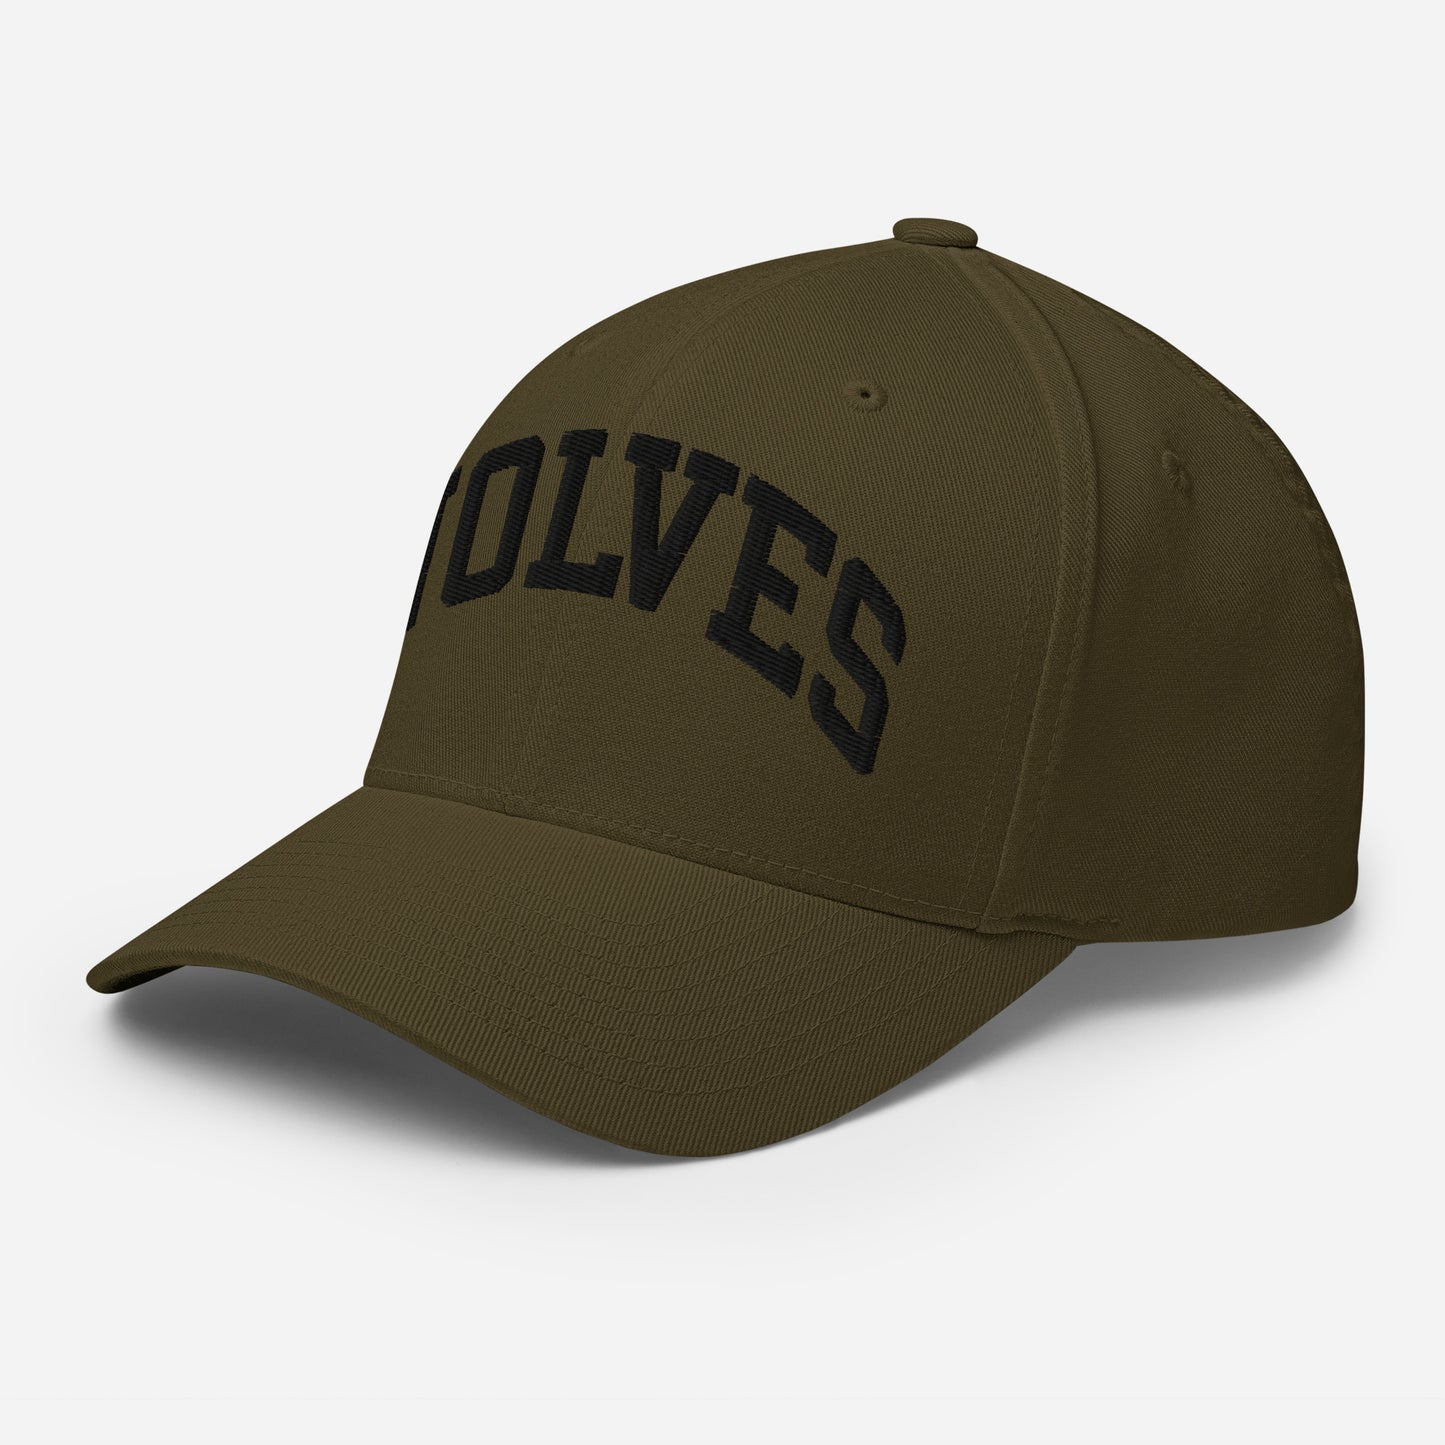 Wolves Industries HBG Structured Twill Cap